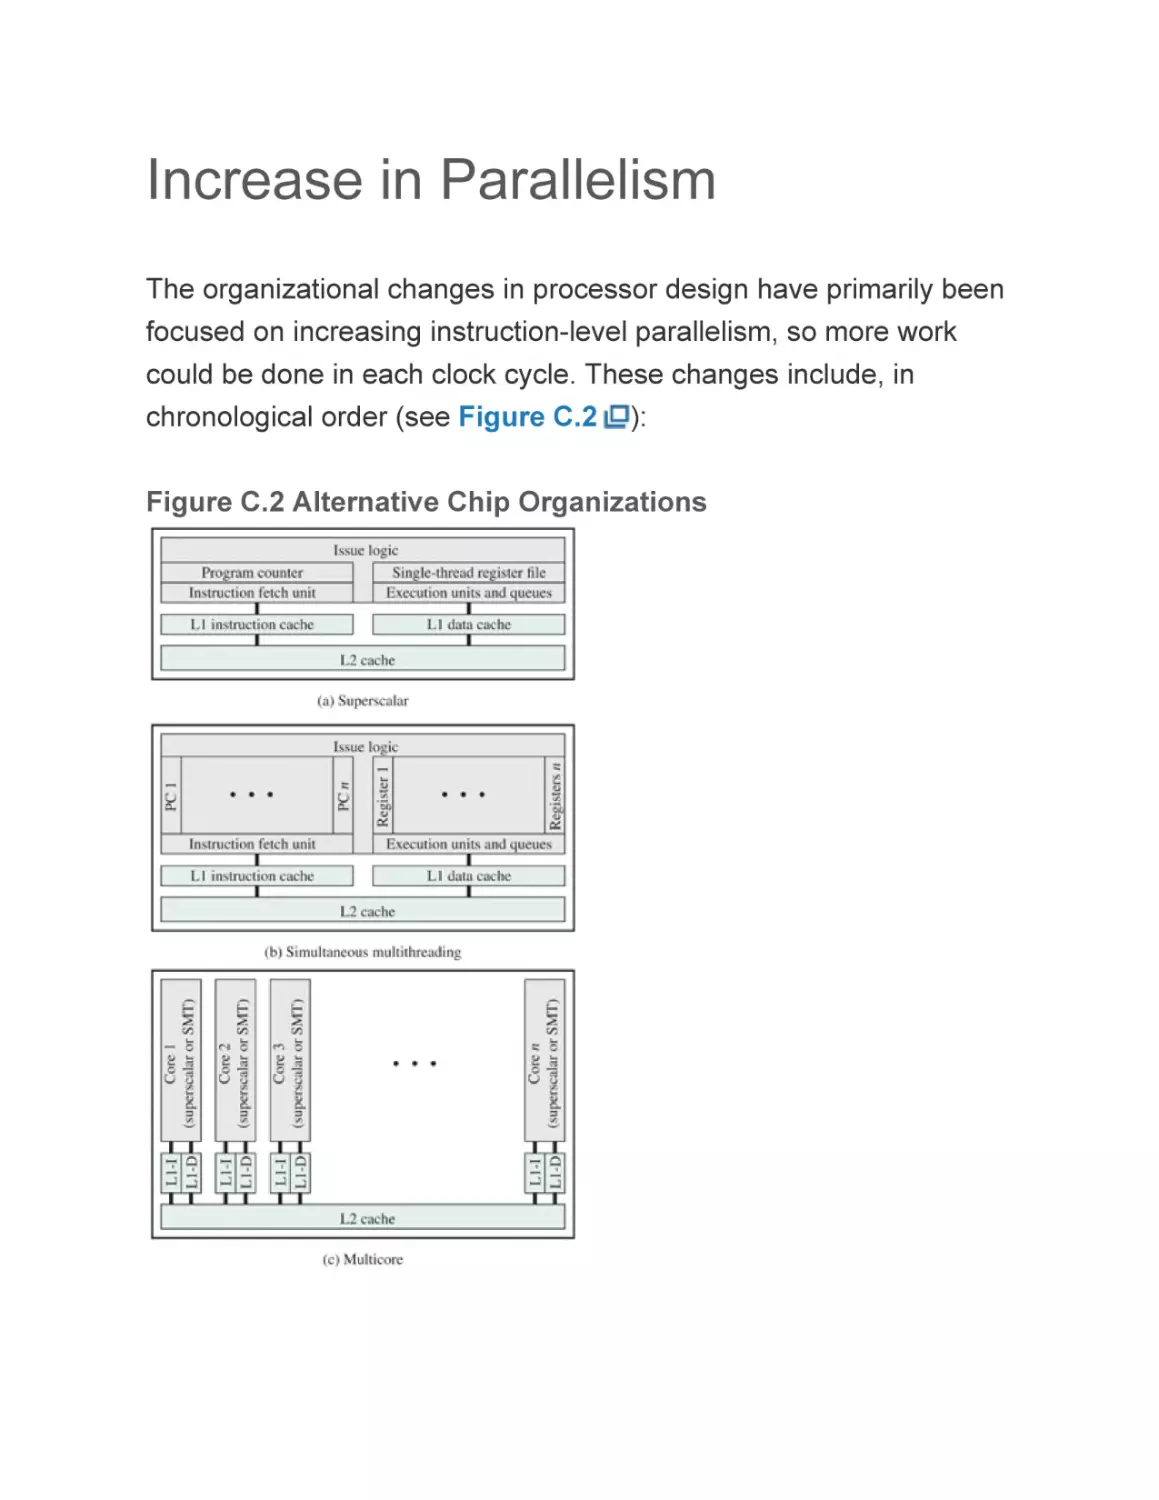 Increase in Parallelism